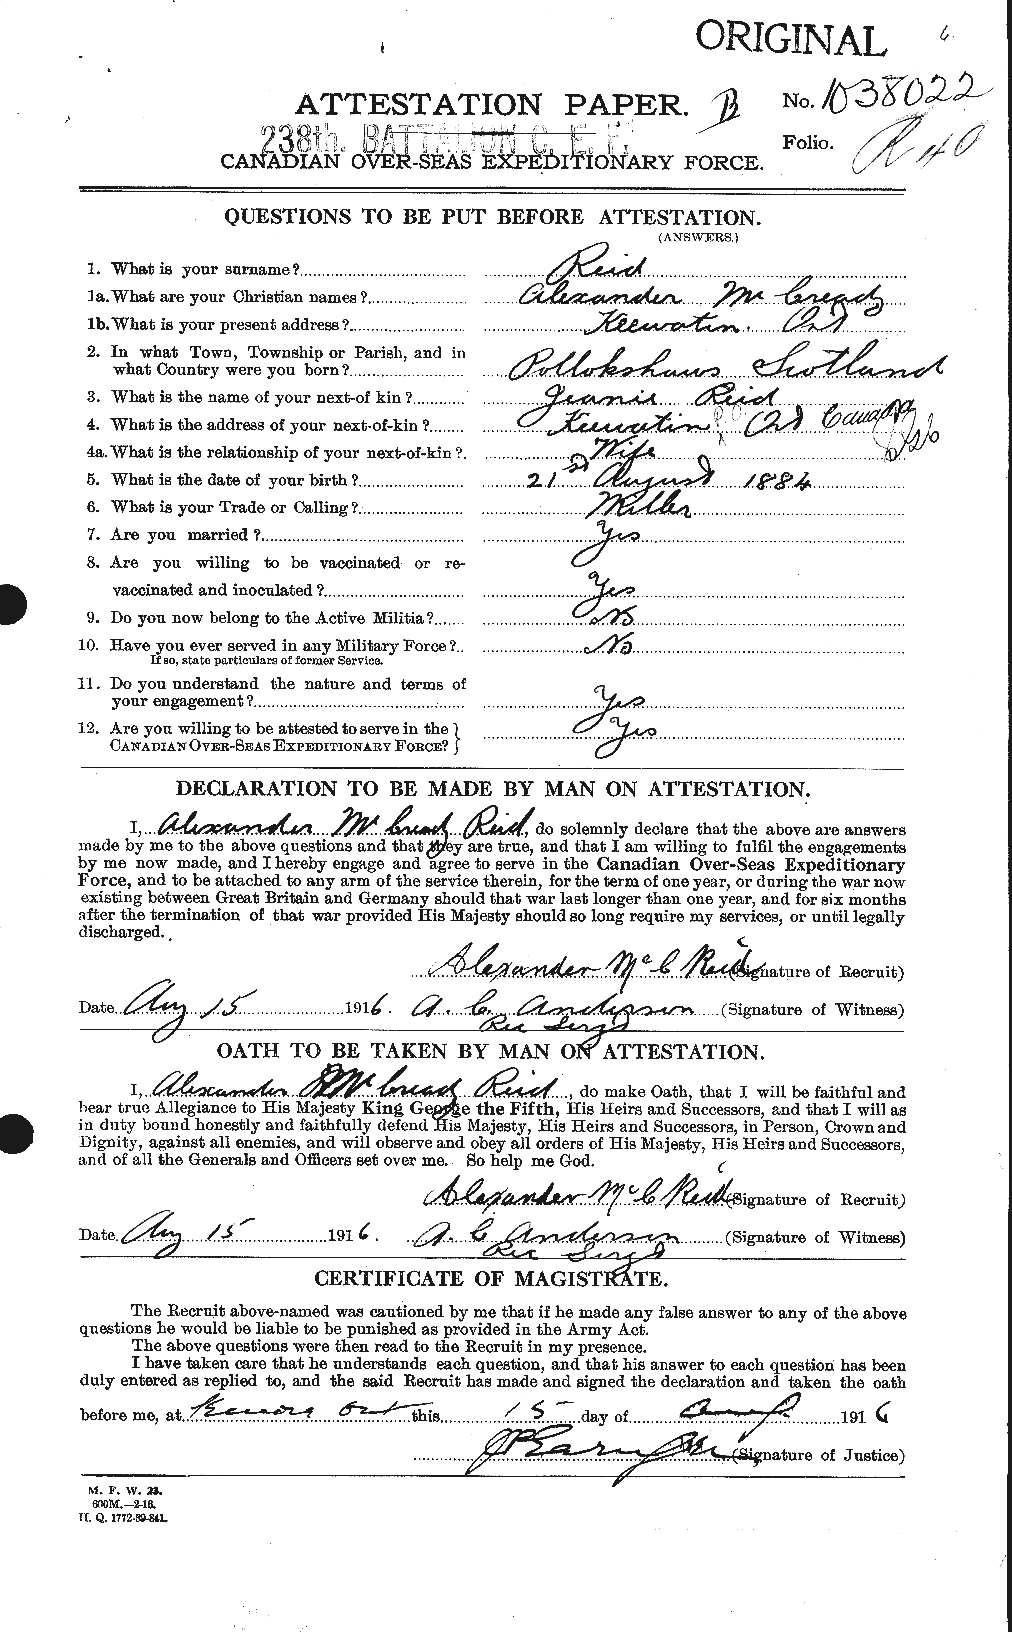 Personnel Records of the First World War - CEF 597785a